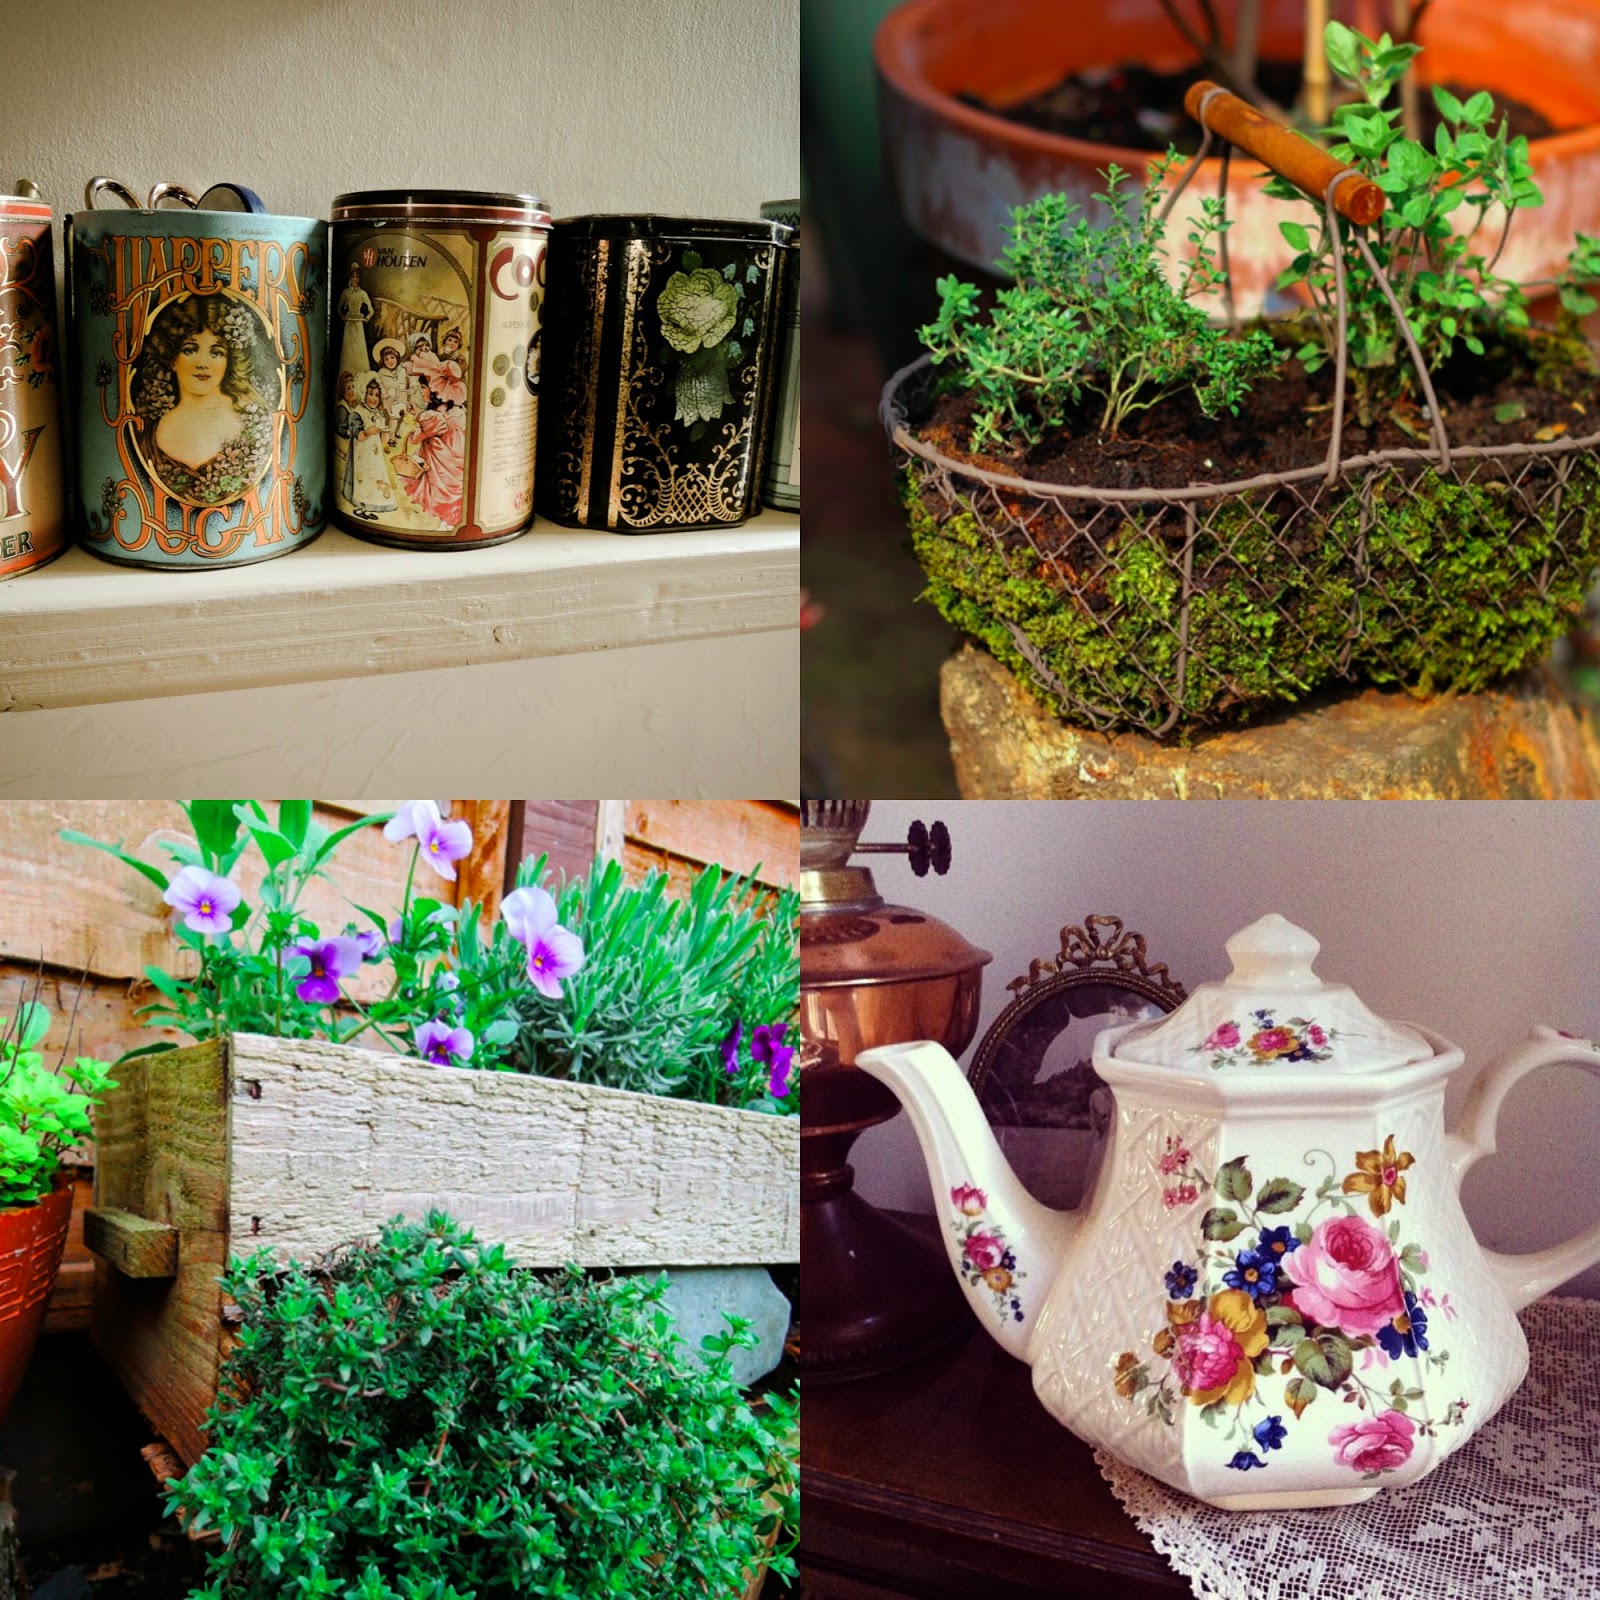 Planting in teapots, tins, baskets and boxes